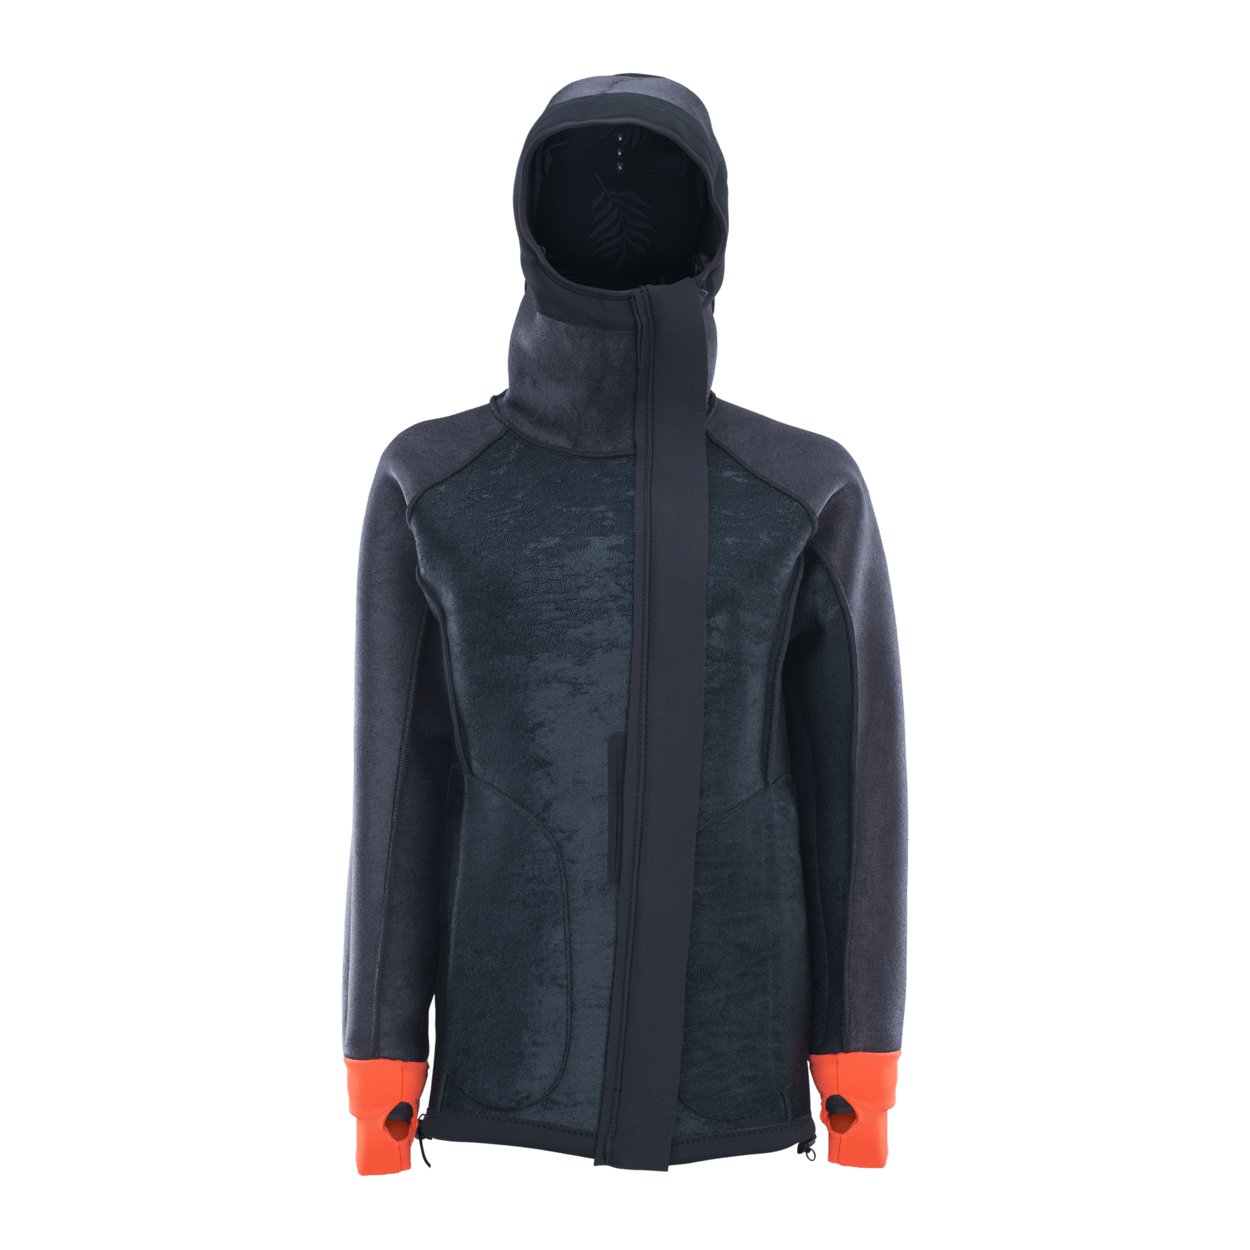 ION Neo Shelter Jacket Amp women 2023 - Worthing Watersports - 9010583118482 - Tops - ION Water